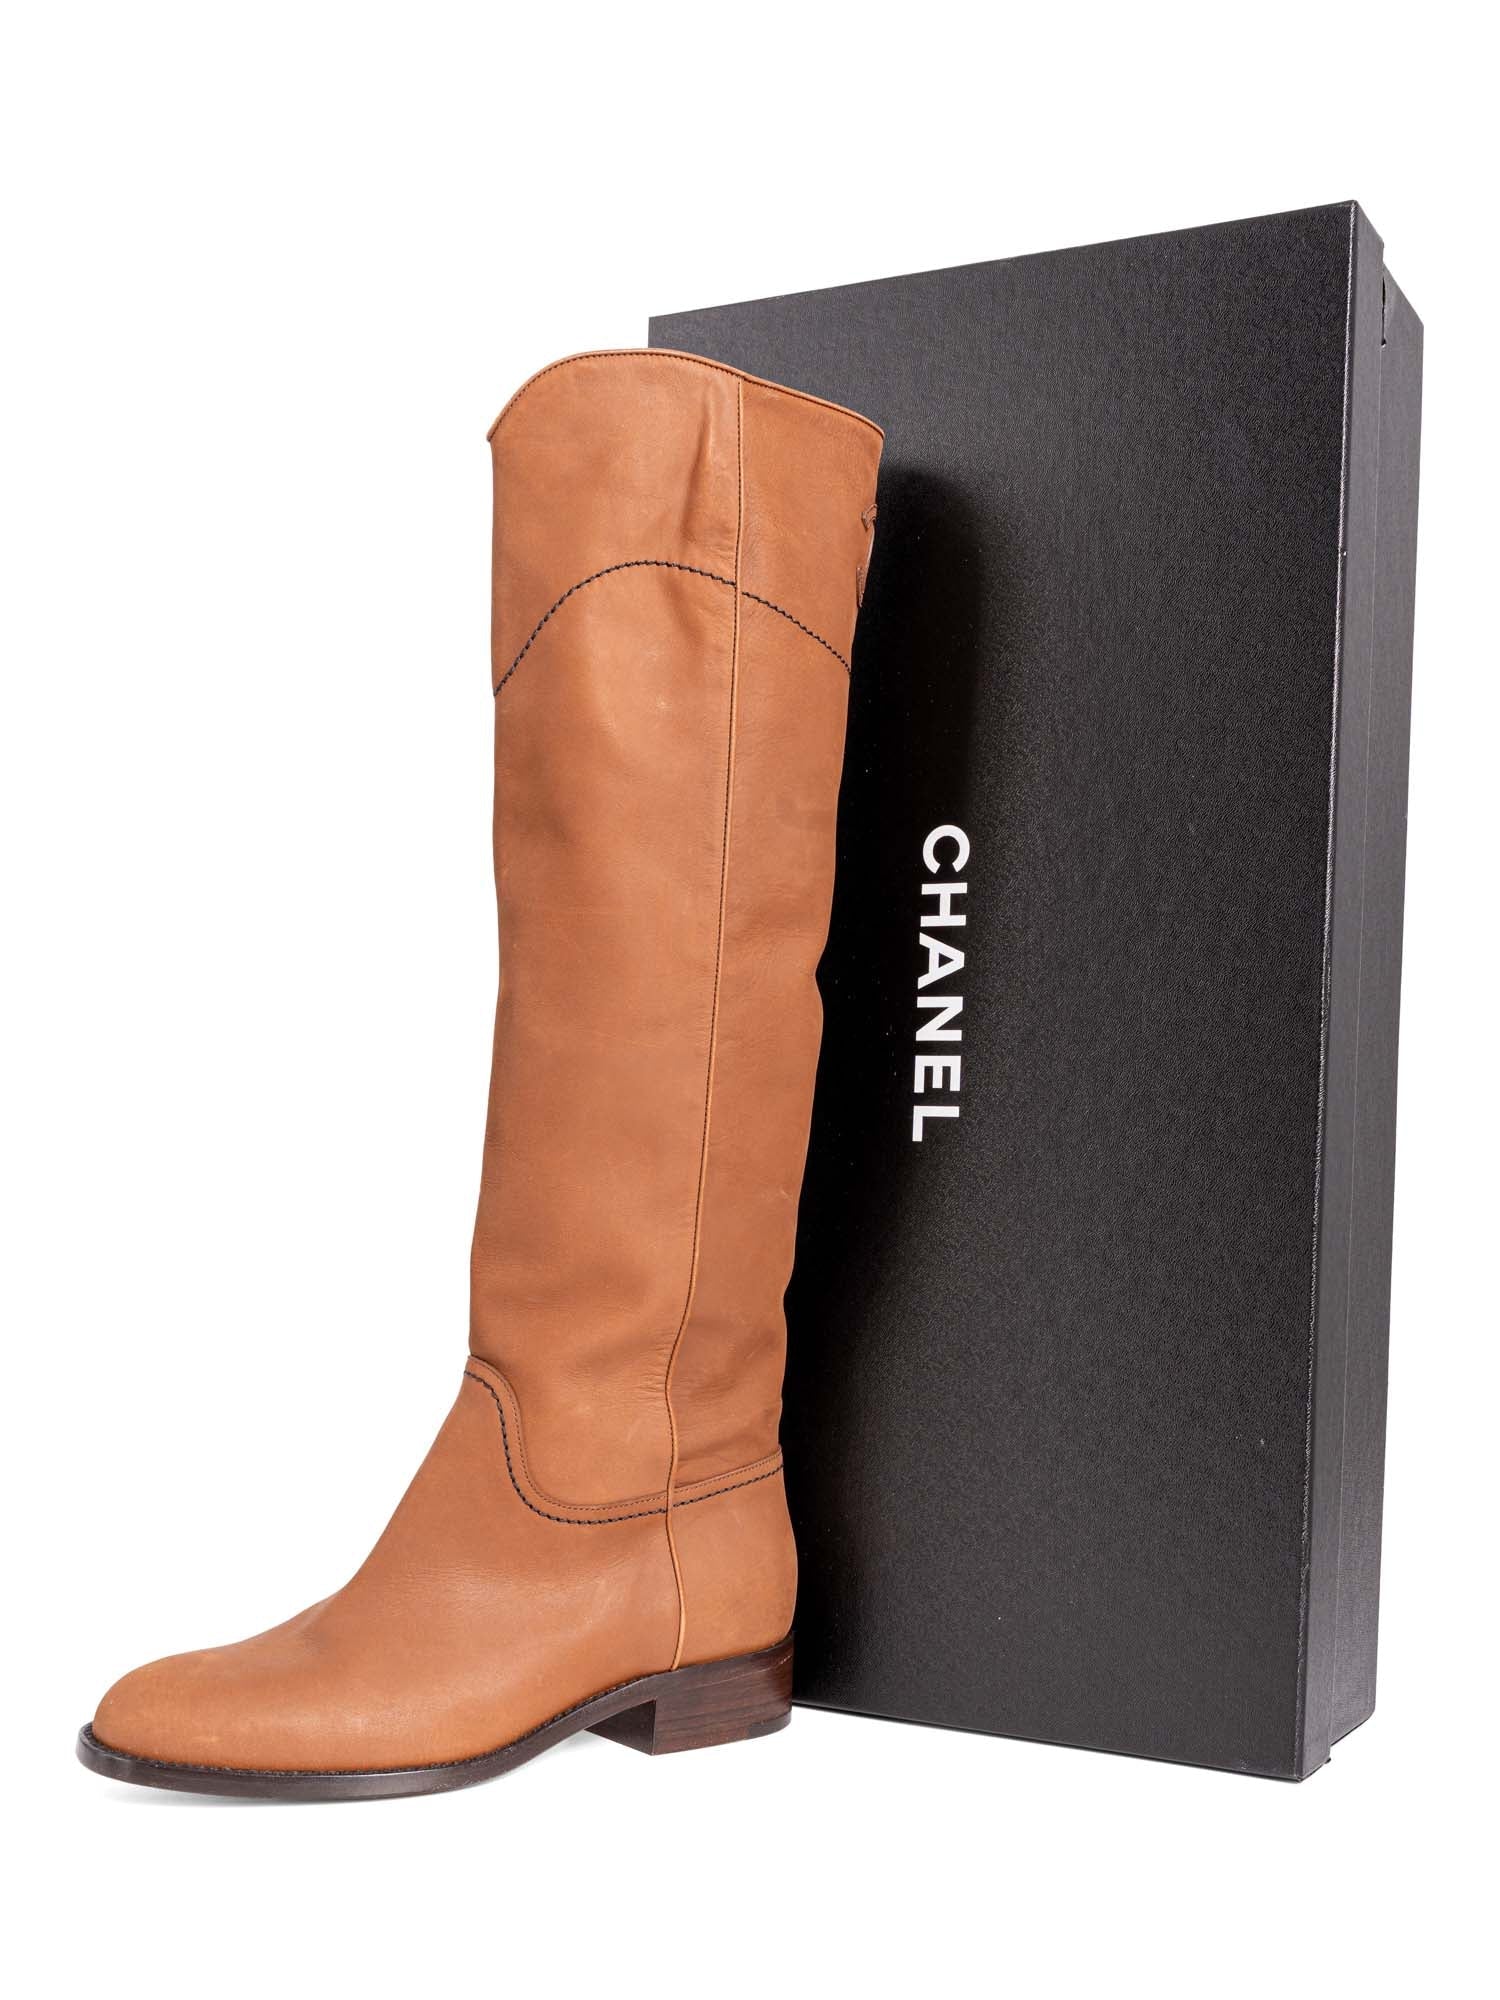 CHANEL CC Logo Leather Pull On Flat Boots Brown-designer resale